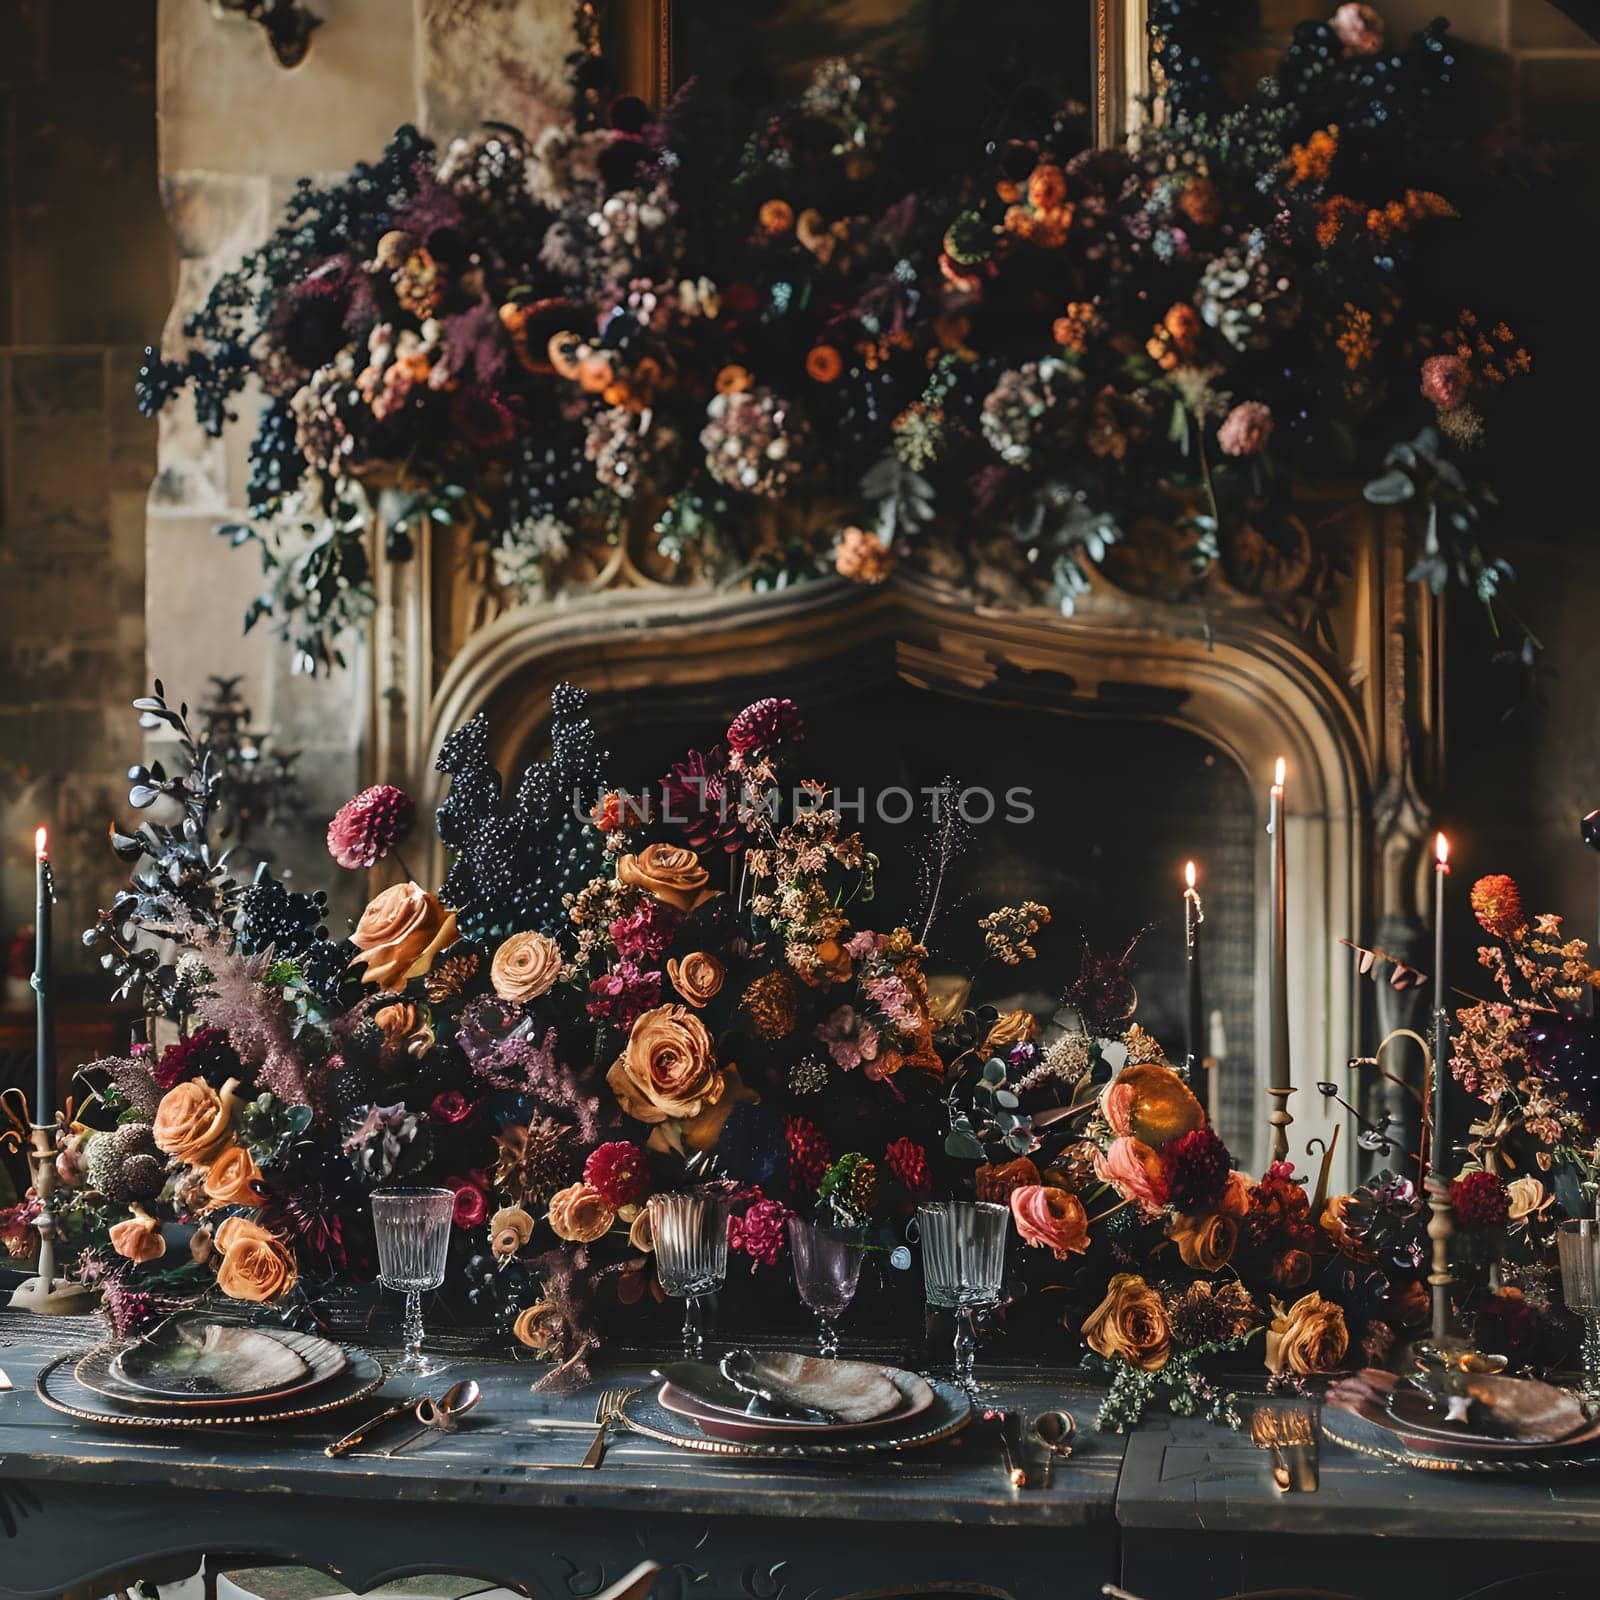 Artistic display of plates, candles, and flowers by the fireplace by Nadtochiy